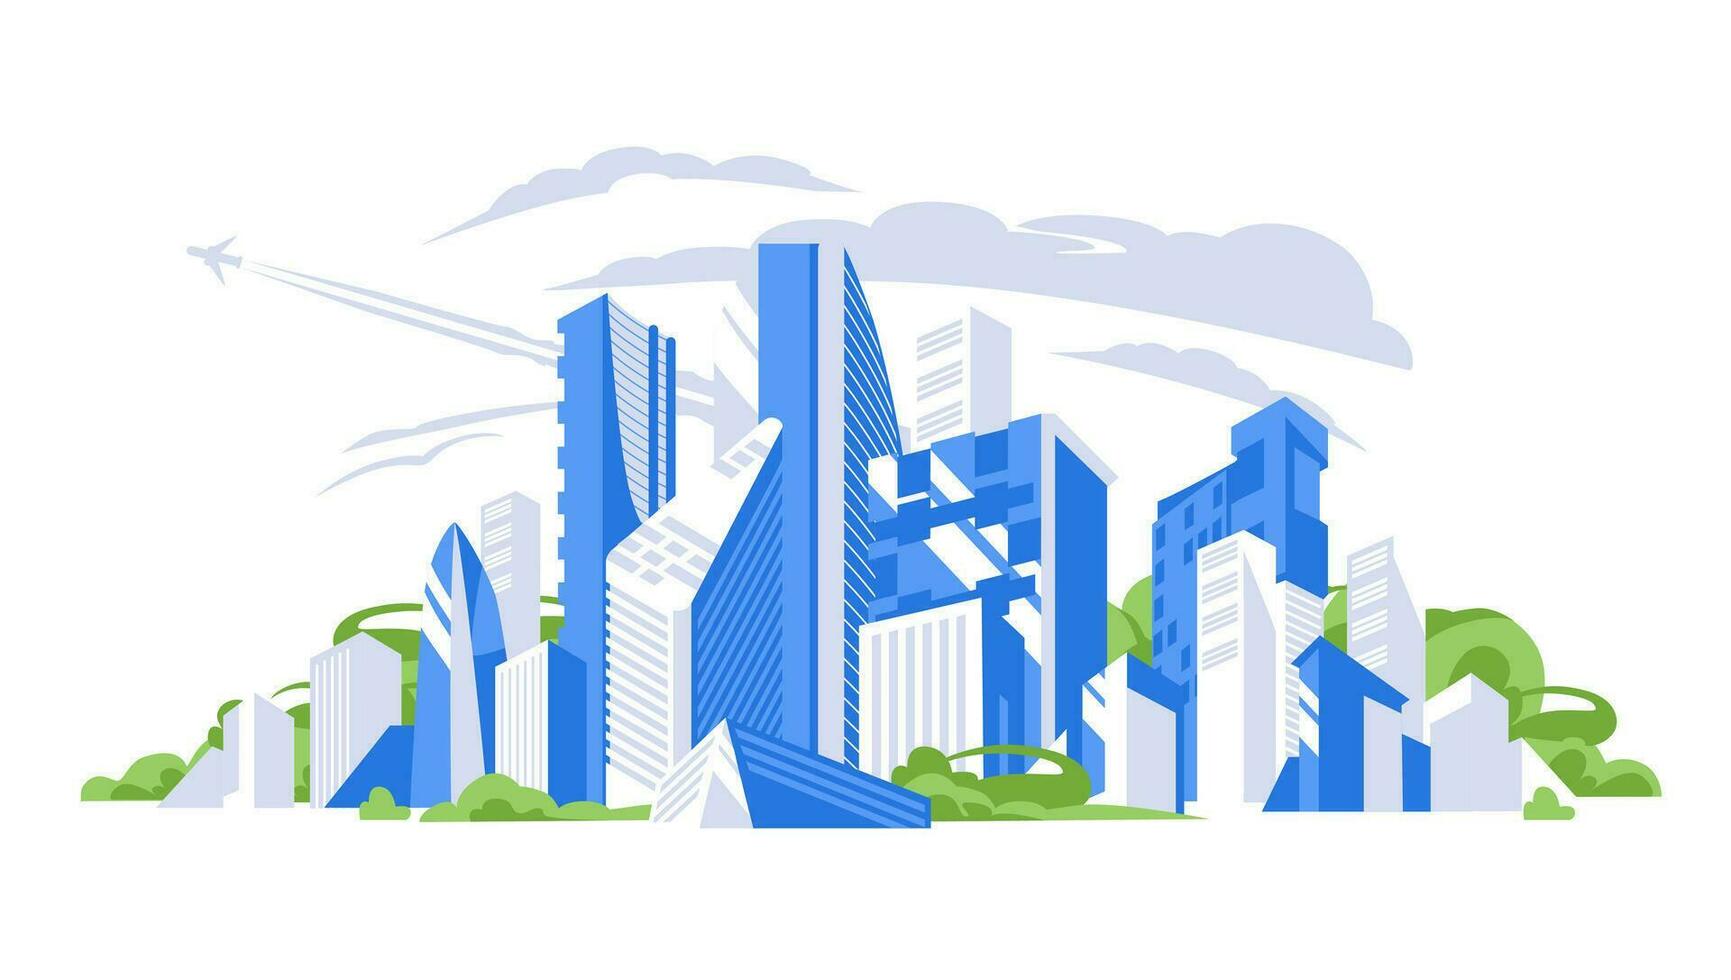 Blue and gray cityscape background. City buildings with trees. Urban landscape. Modern architectural panorama in flat style. Vector illustration horizontal wallpaper